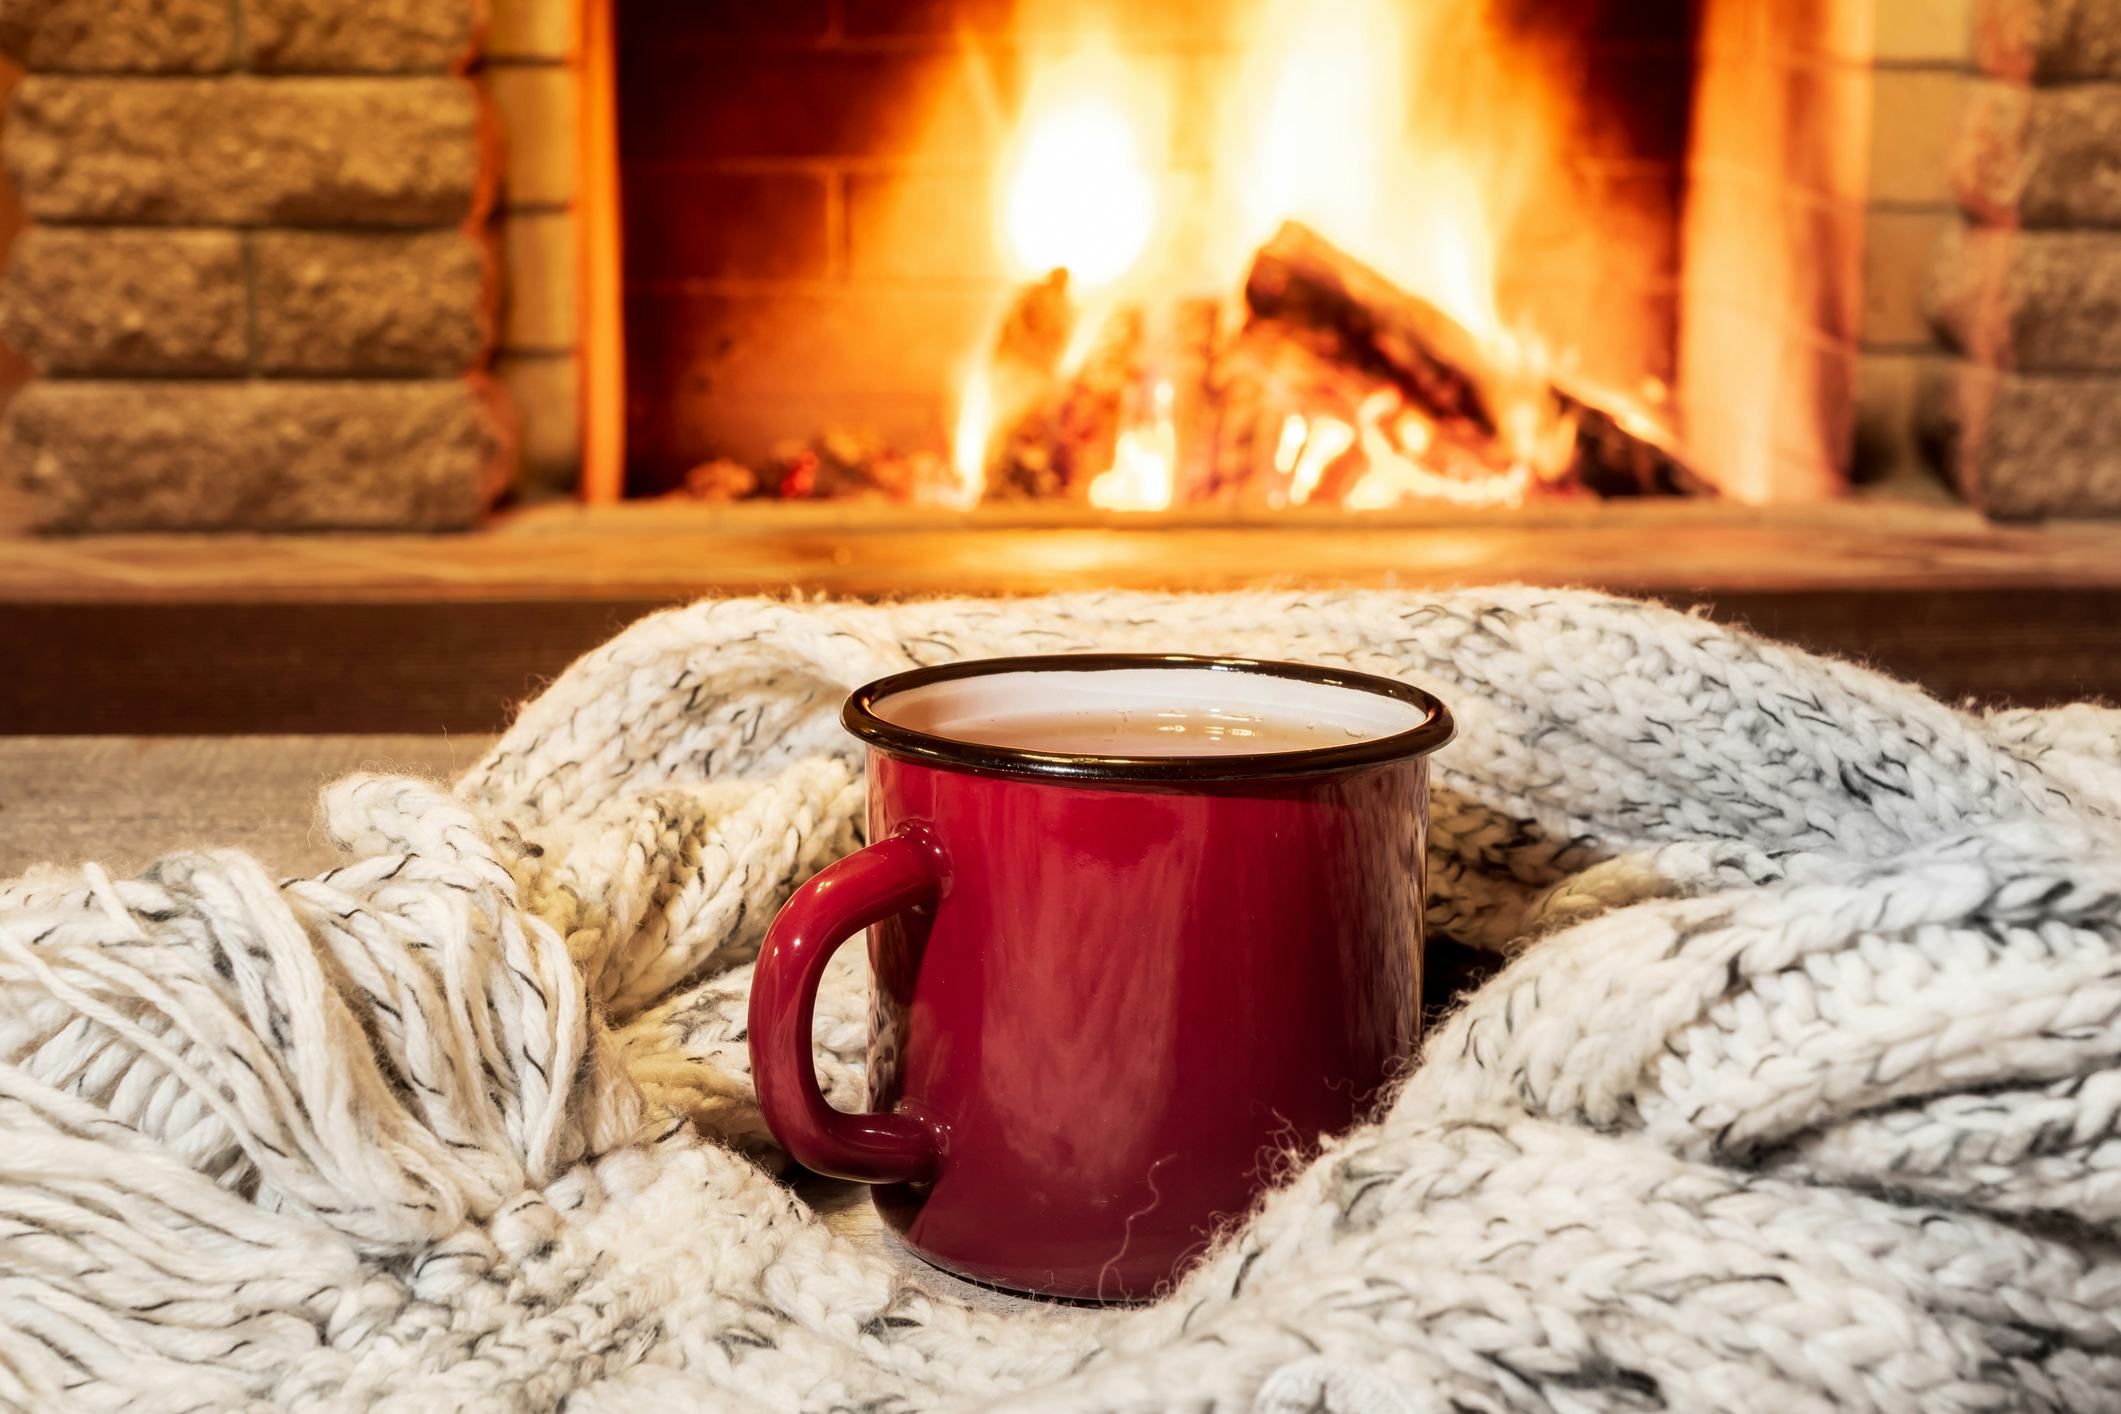 Red enameled mug for hot tea and cozy warm scarf near fireplace